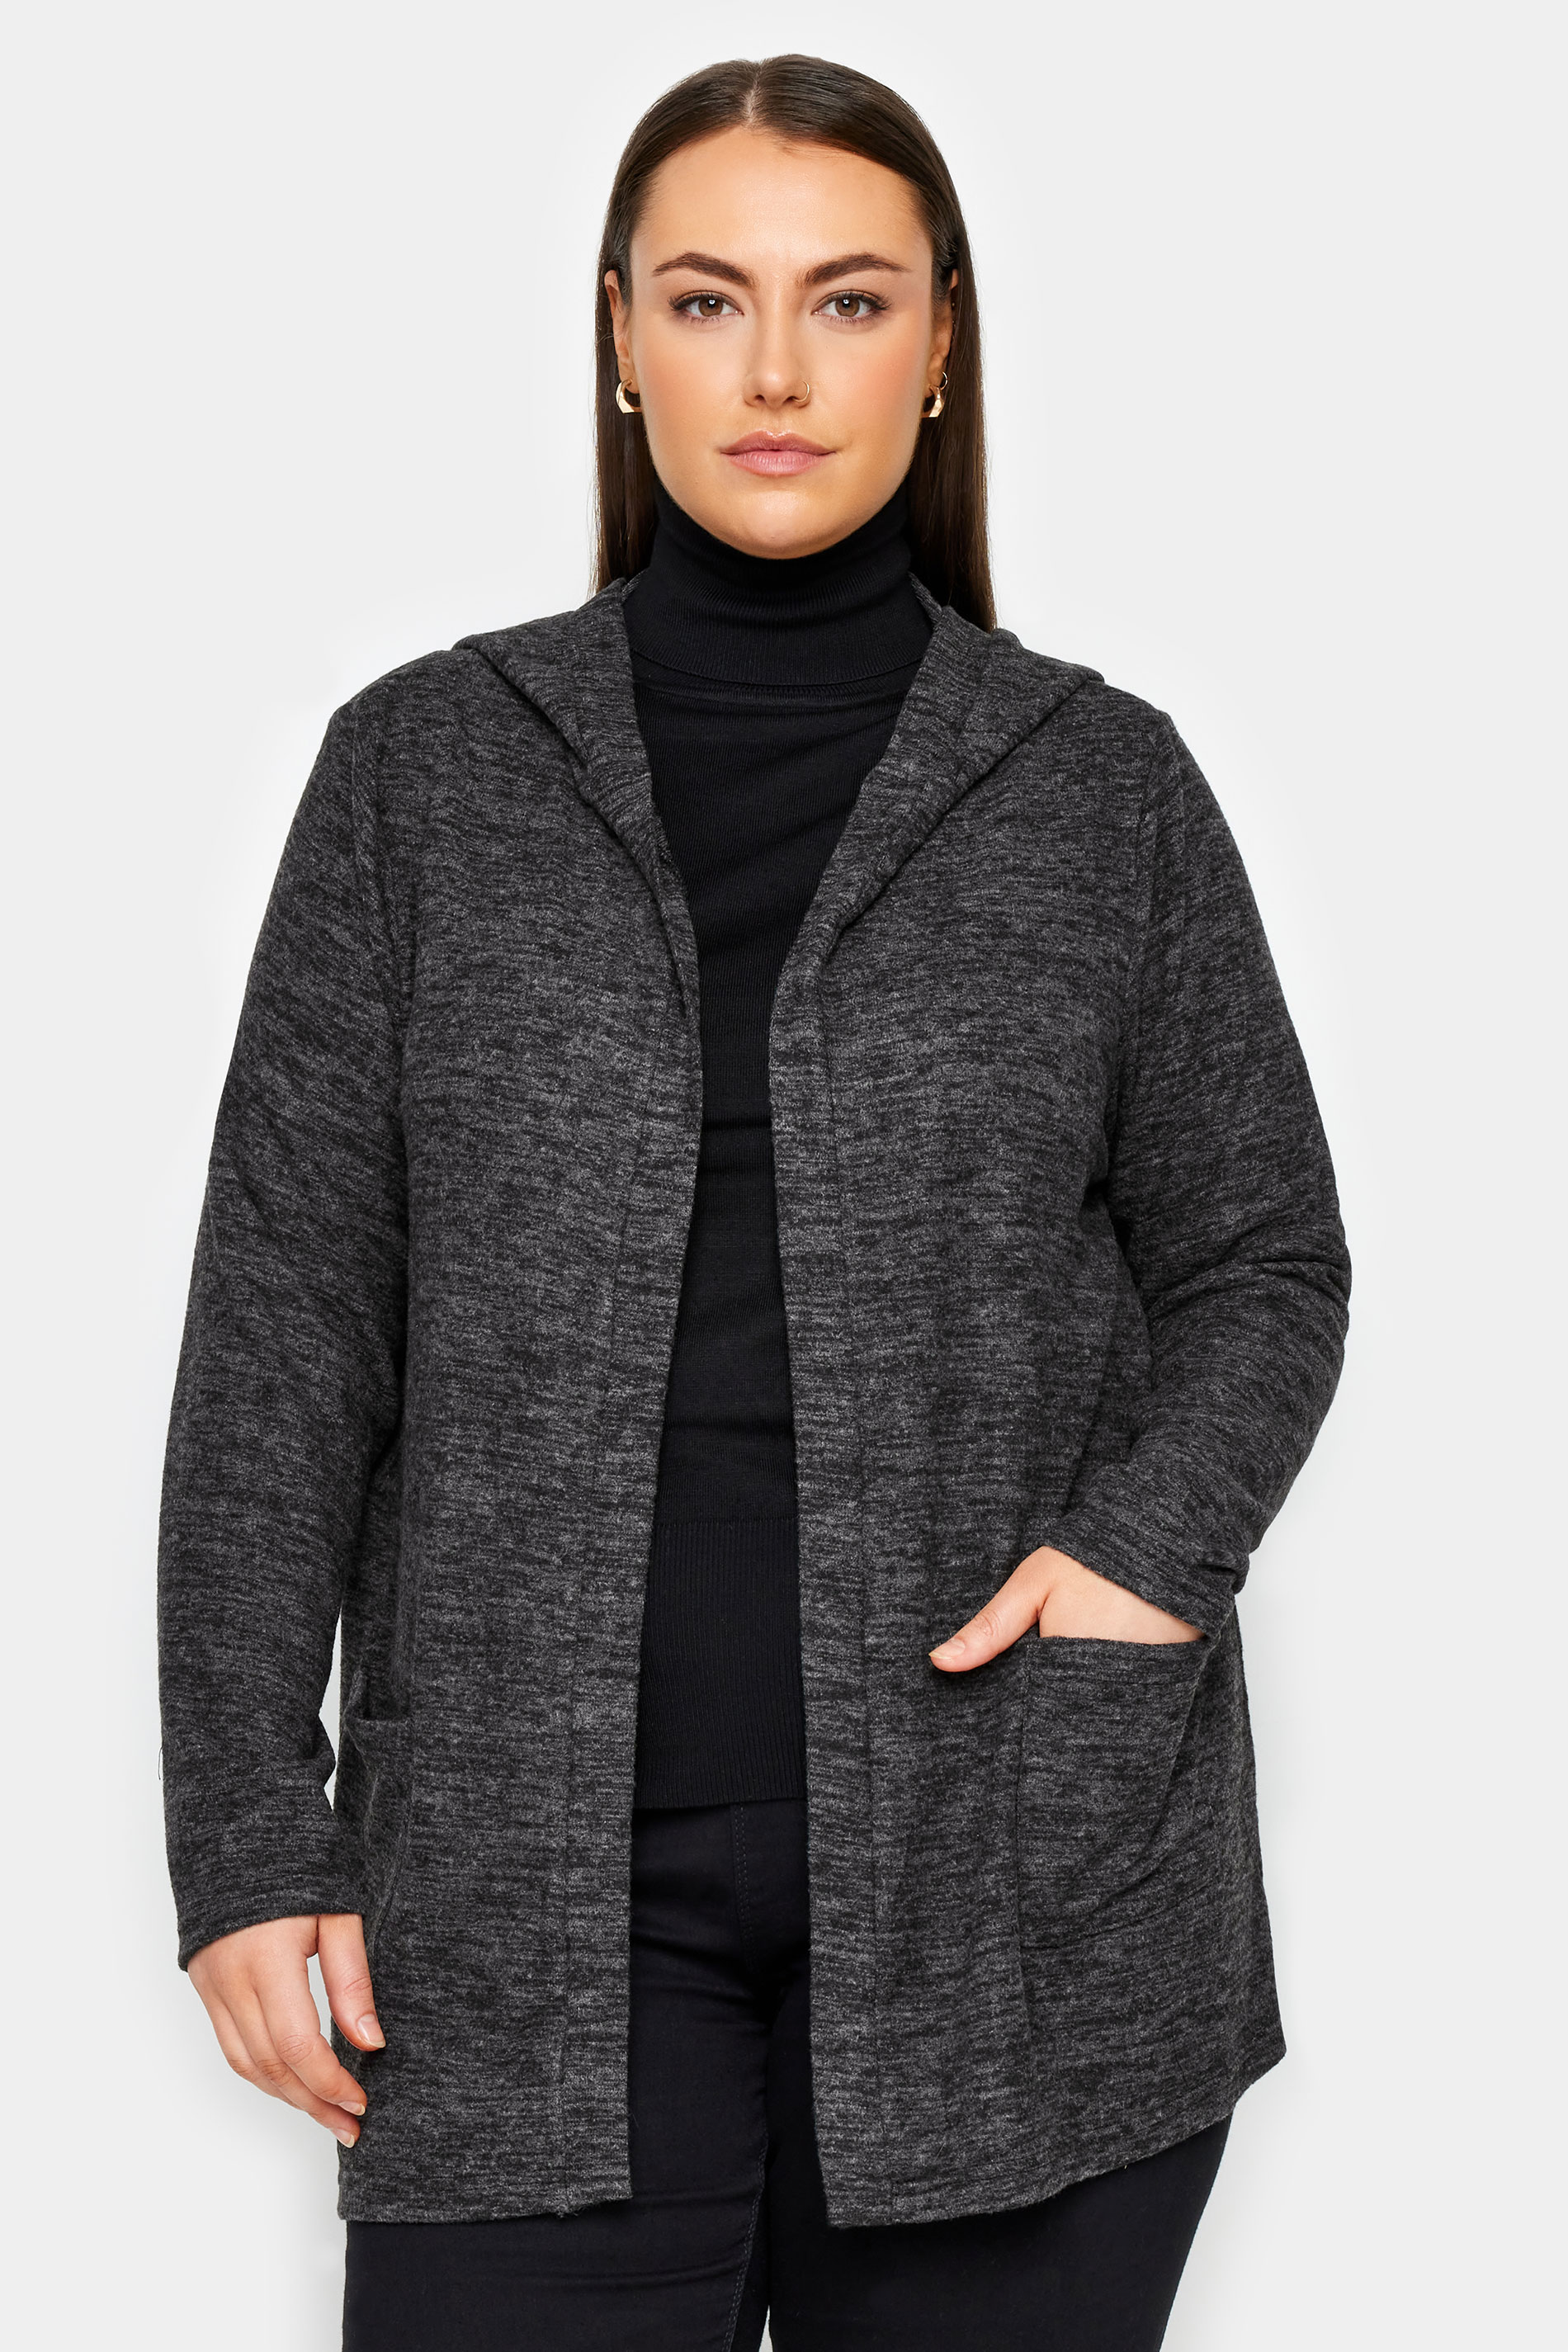 Evans Charcoal Grey Soft Touch Hooded Cardigan | Evans 1